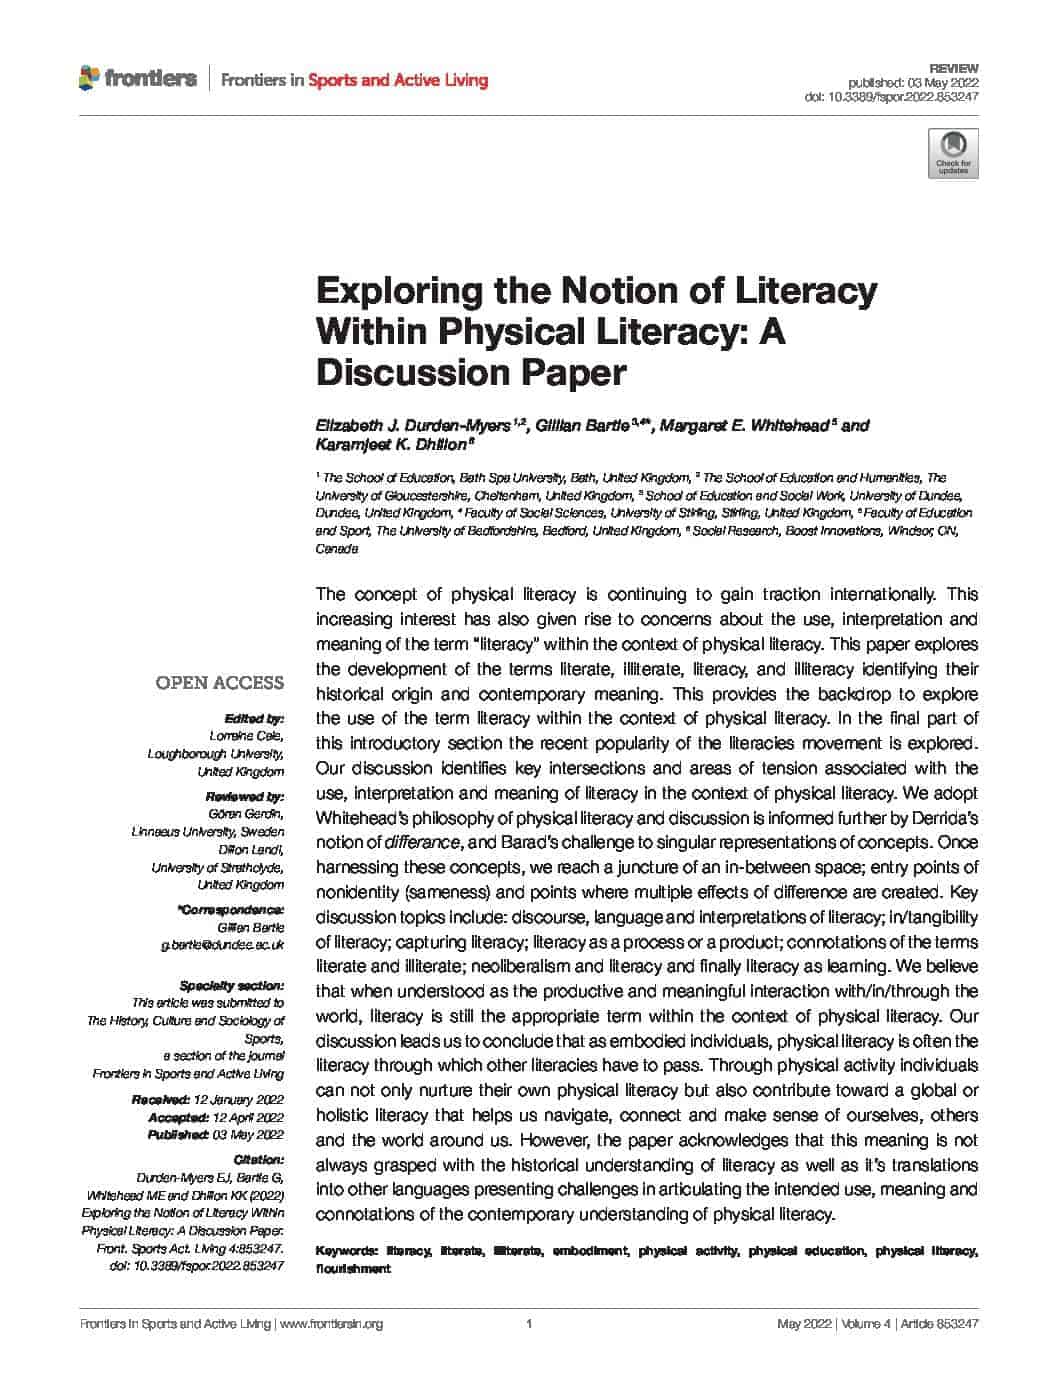 Featured image for “Exploring the Notion of Literacy Within Physical Literacy: A Discussion Paper”